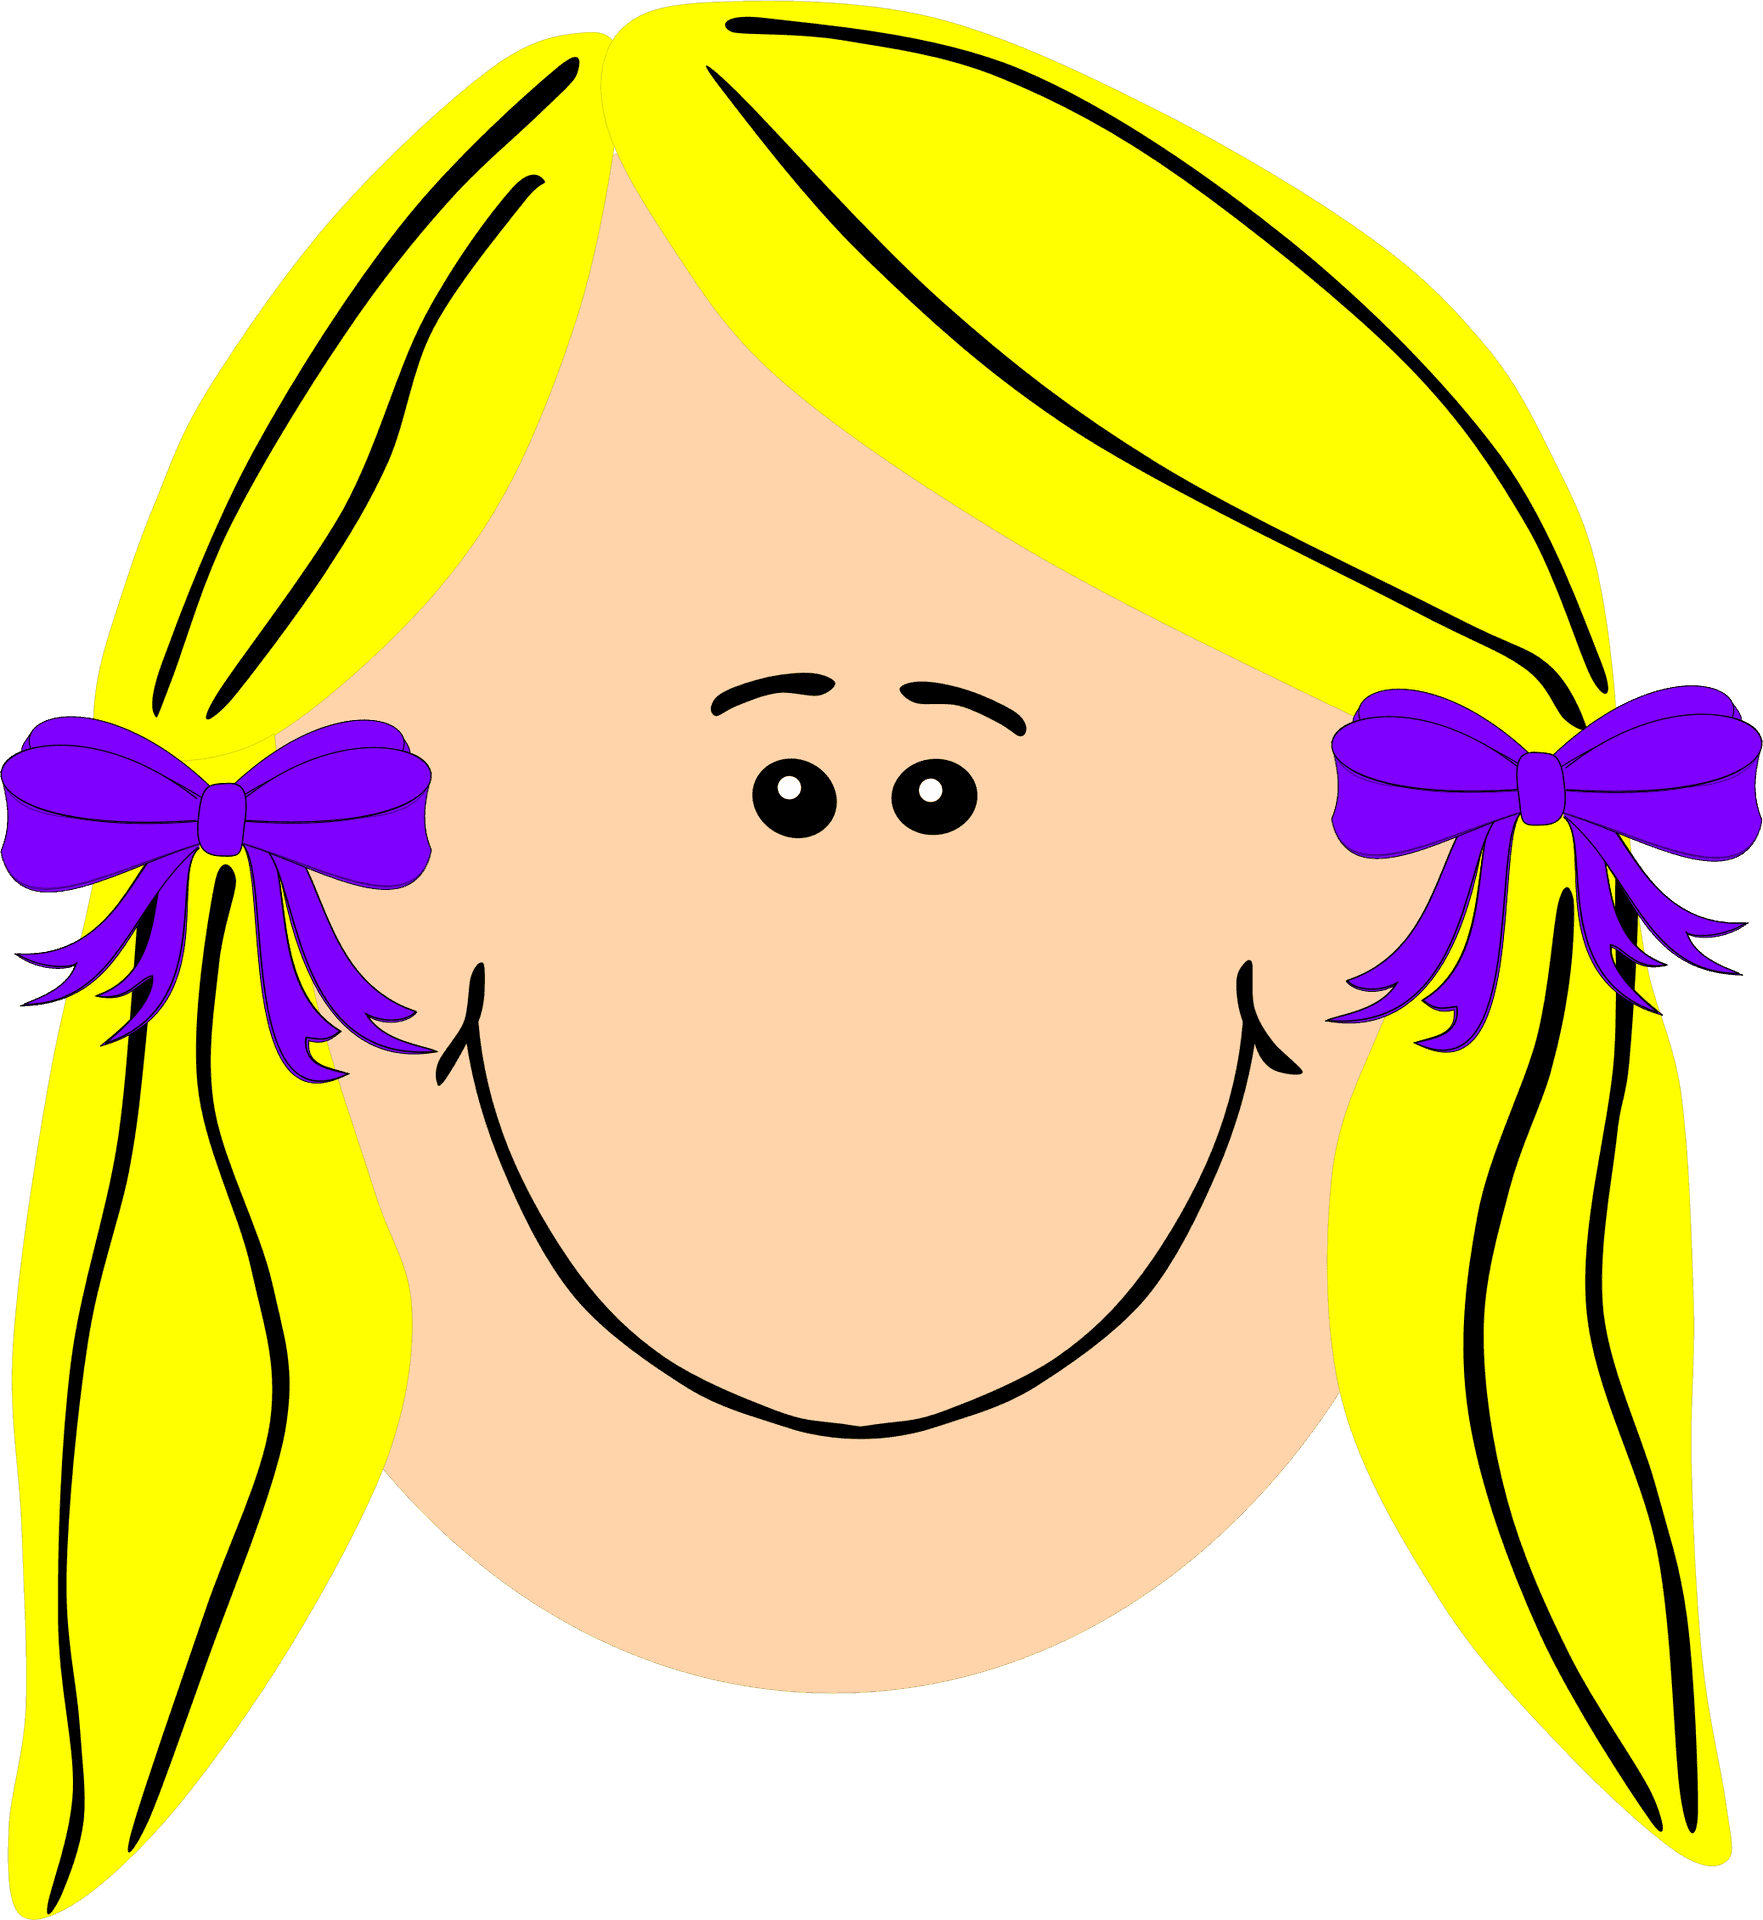 Blonde Hair Cartoon Characterwith Purple Bows PNG